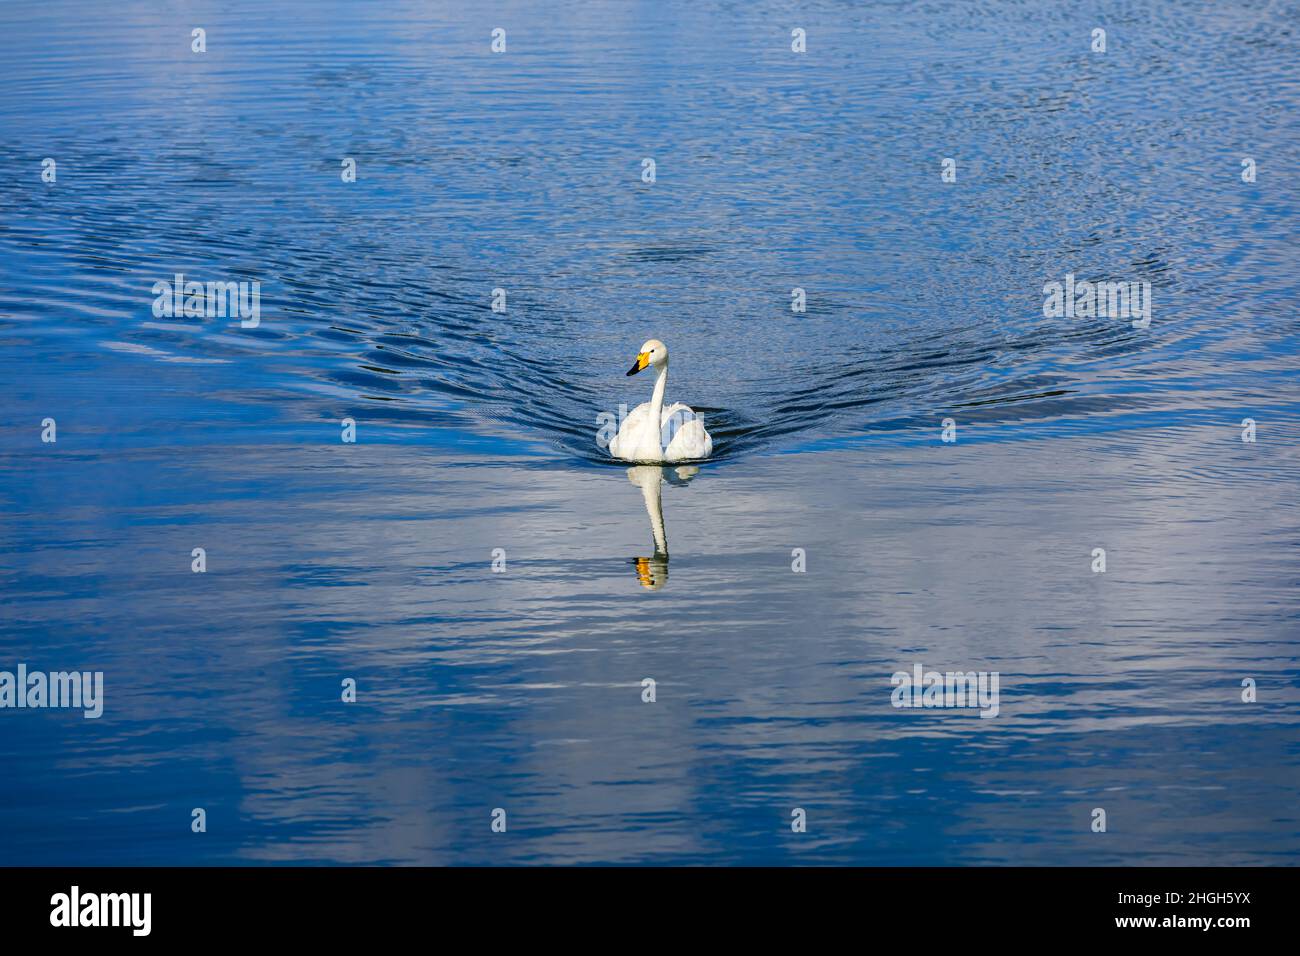 A white swan swimming in the water. Stock Photo